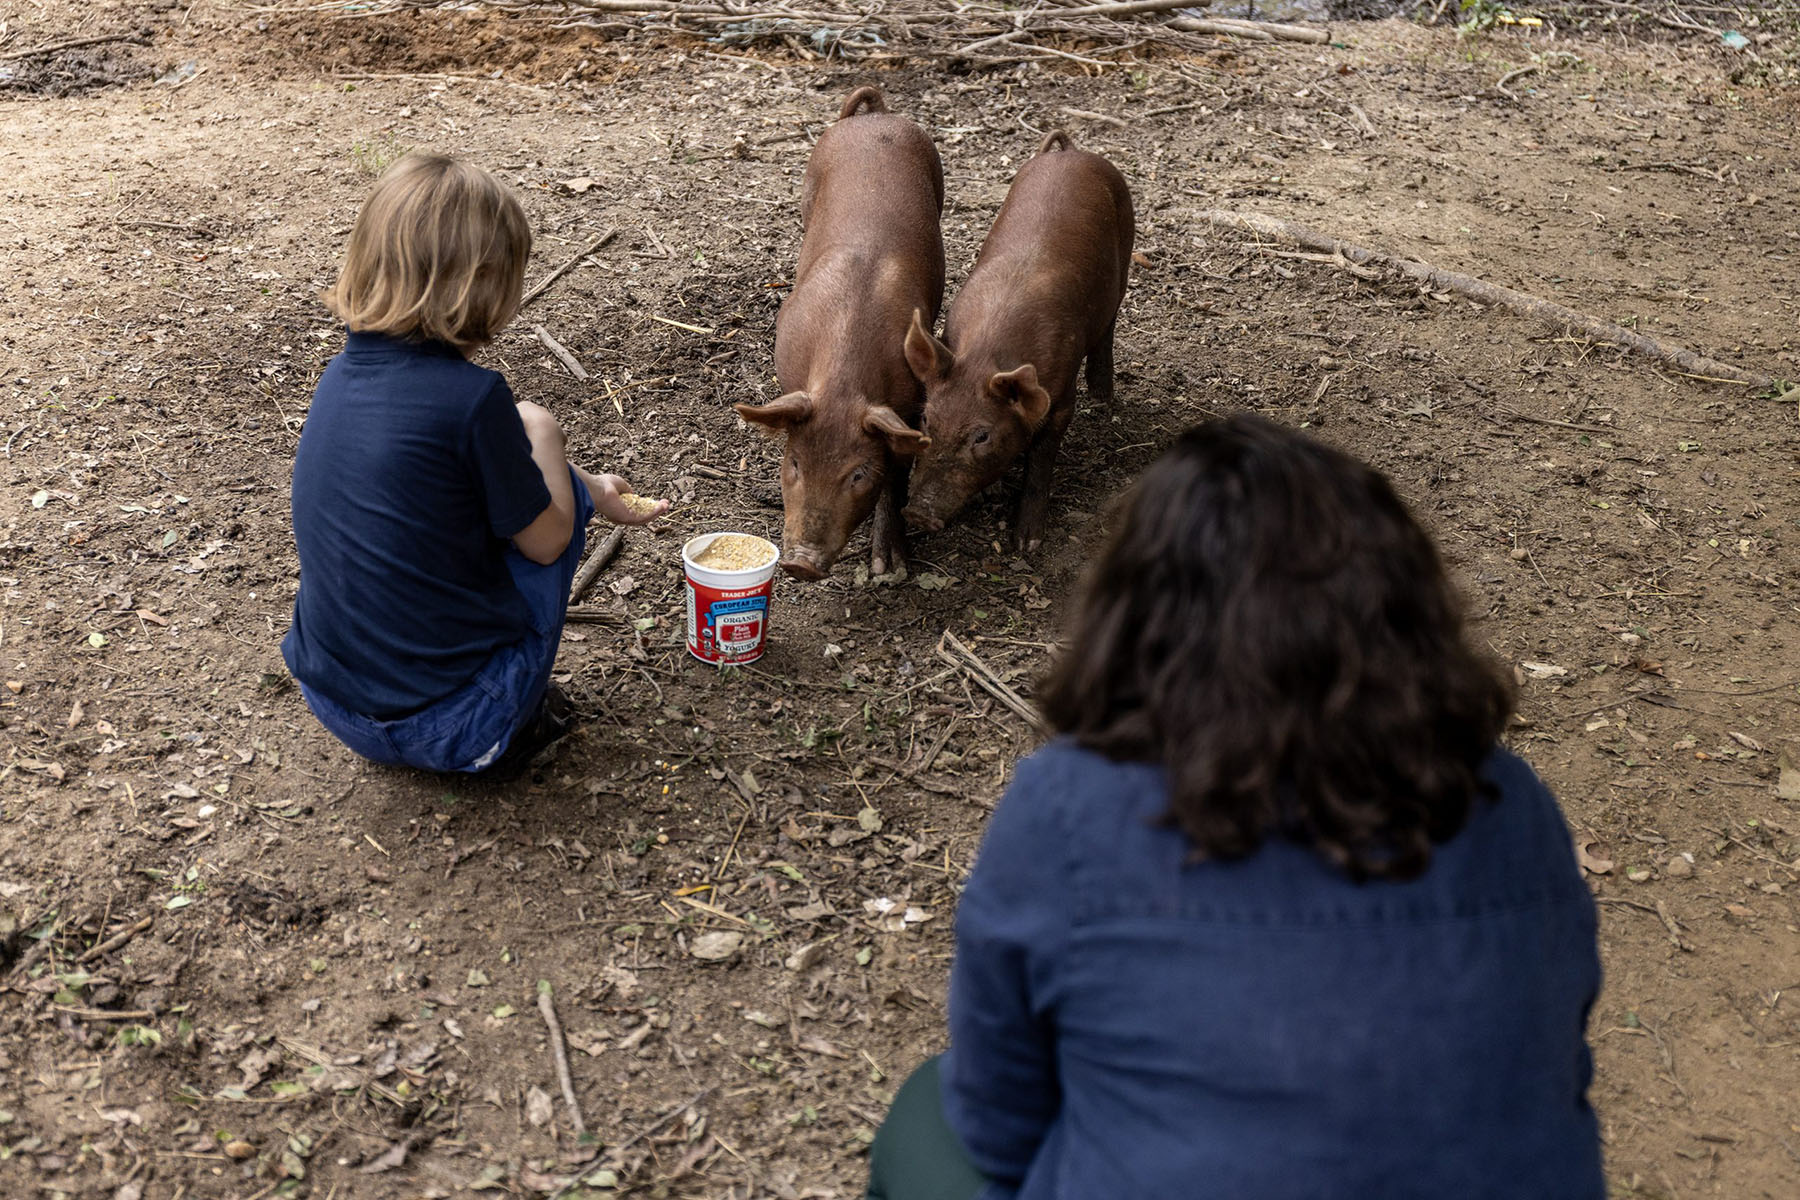 One of the Bauman children feeds the hogs as Marie watches.